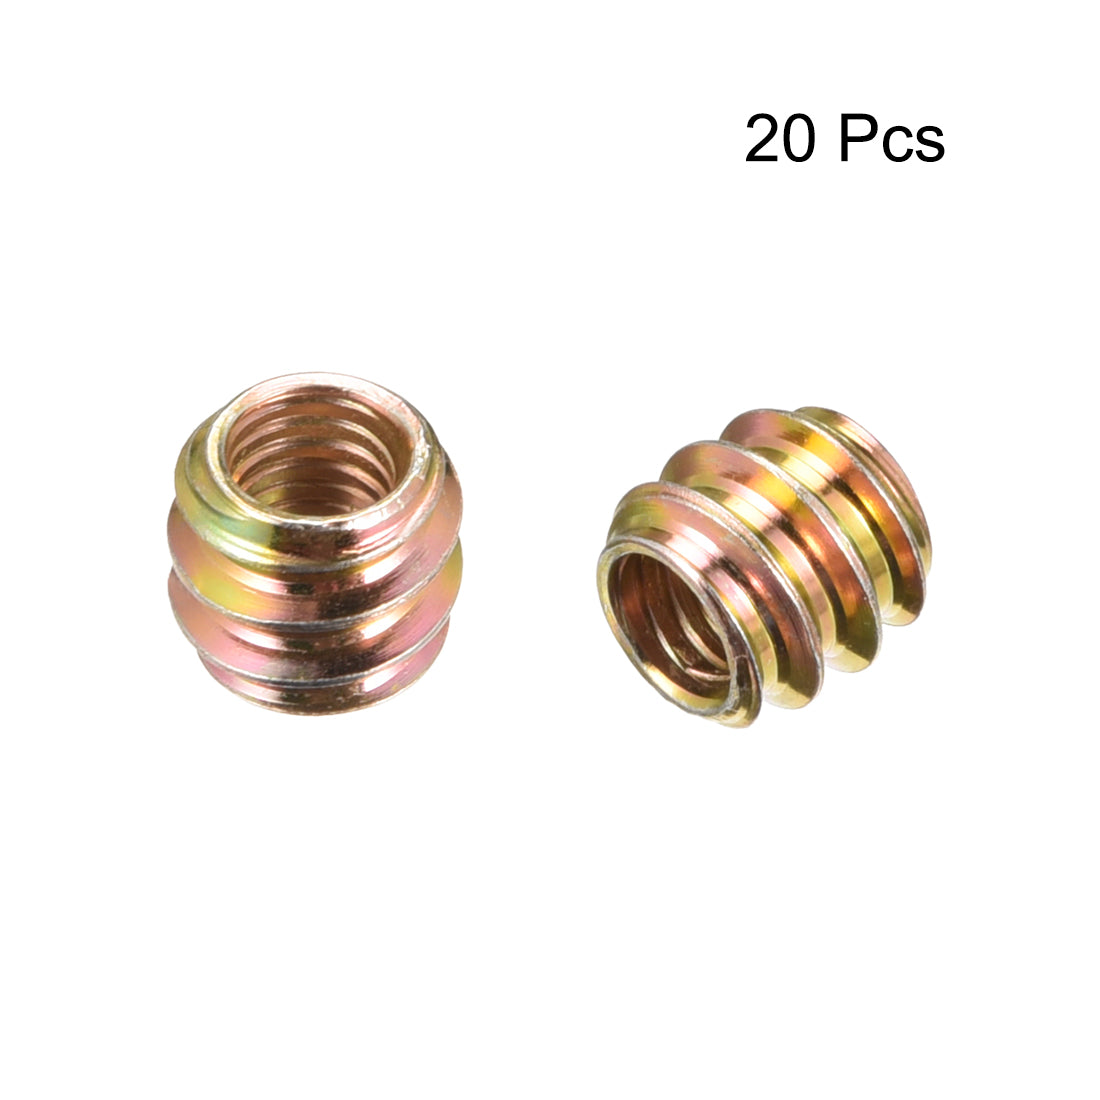 Uxcell Uxcell Furniture Threaded Insert Nuts Carbon Steel M6 Internal Thread 10mm Length 30pcs